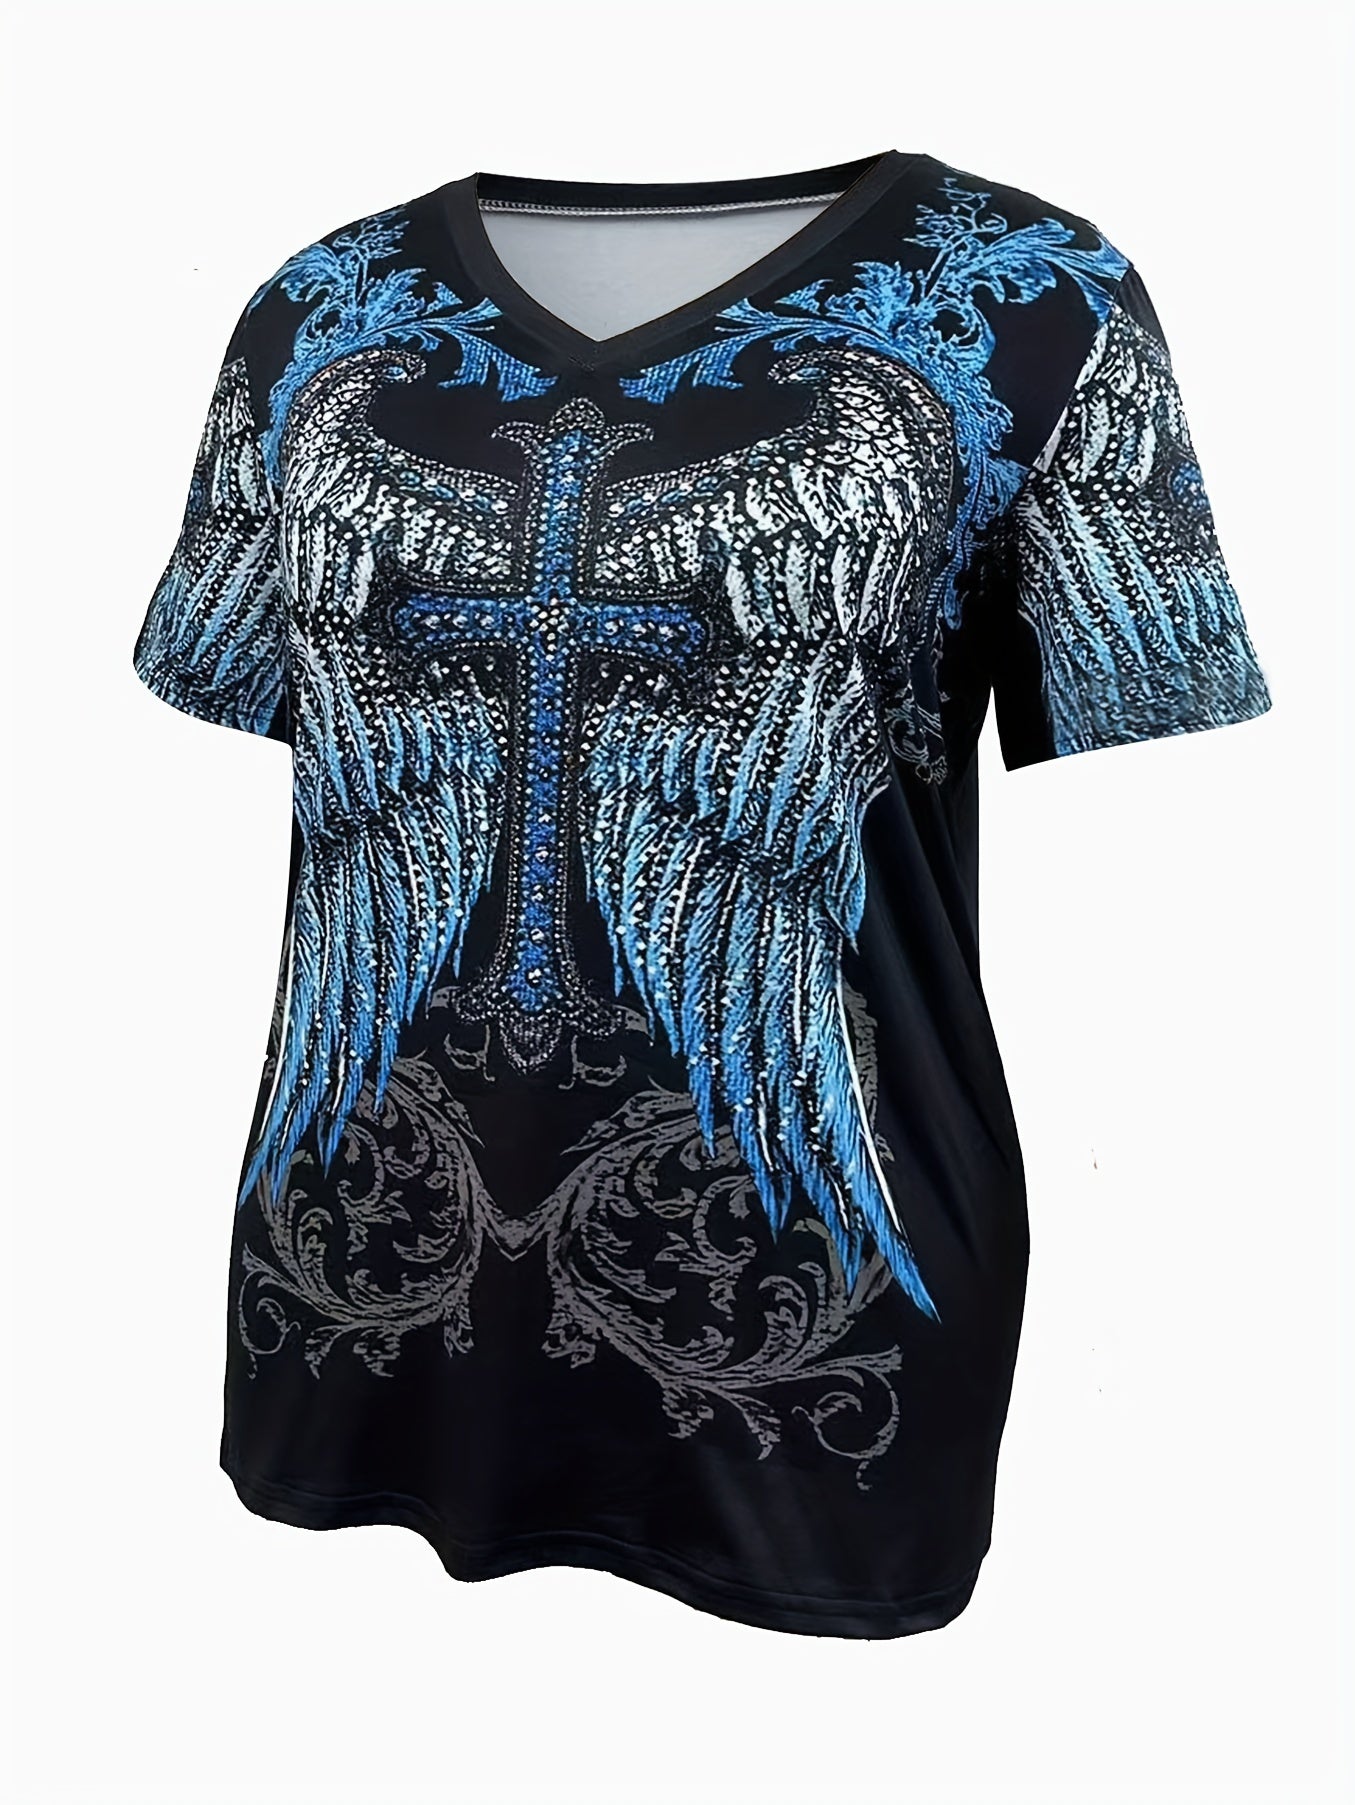 Women's Plus Size Cross Print T-Shirt - Casual V Neck Short Sleeve Tee for Comfortable and Stylish Everyday Wear Bee's to Find